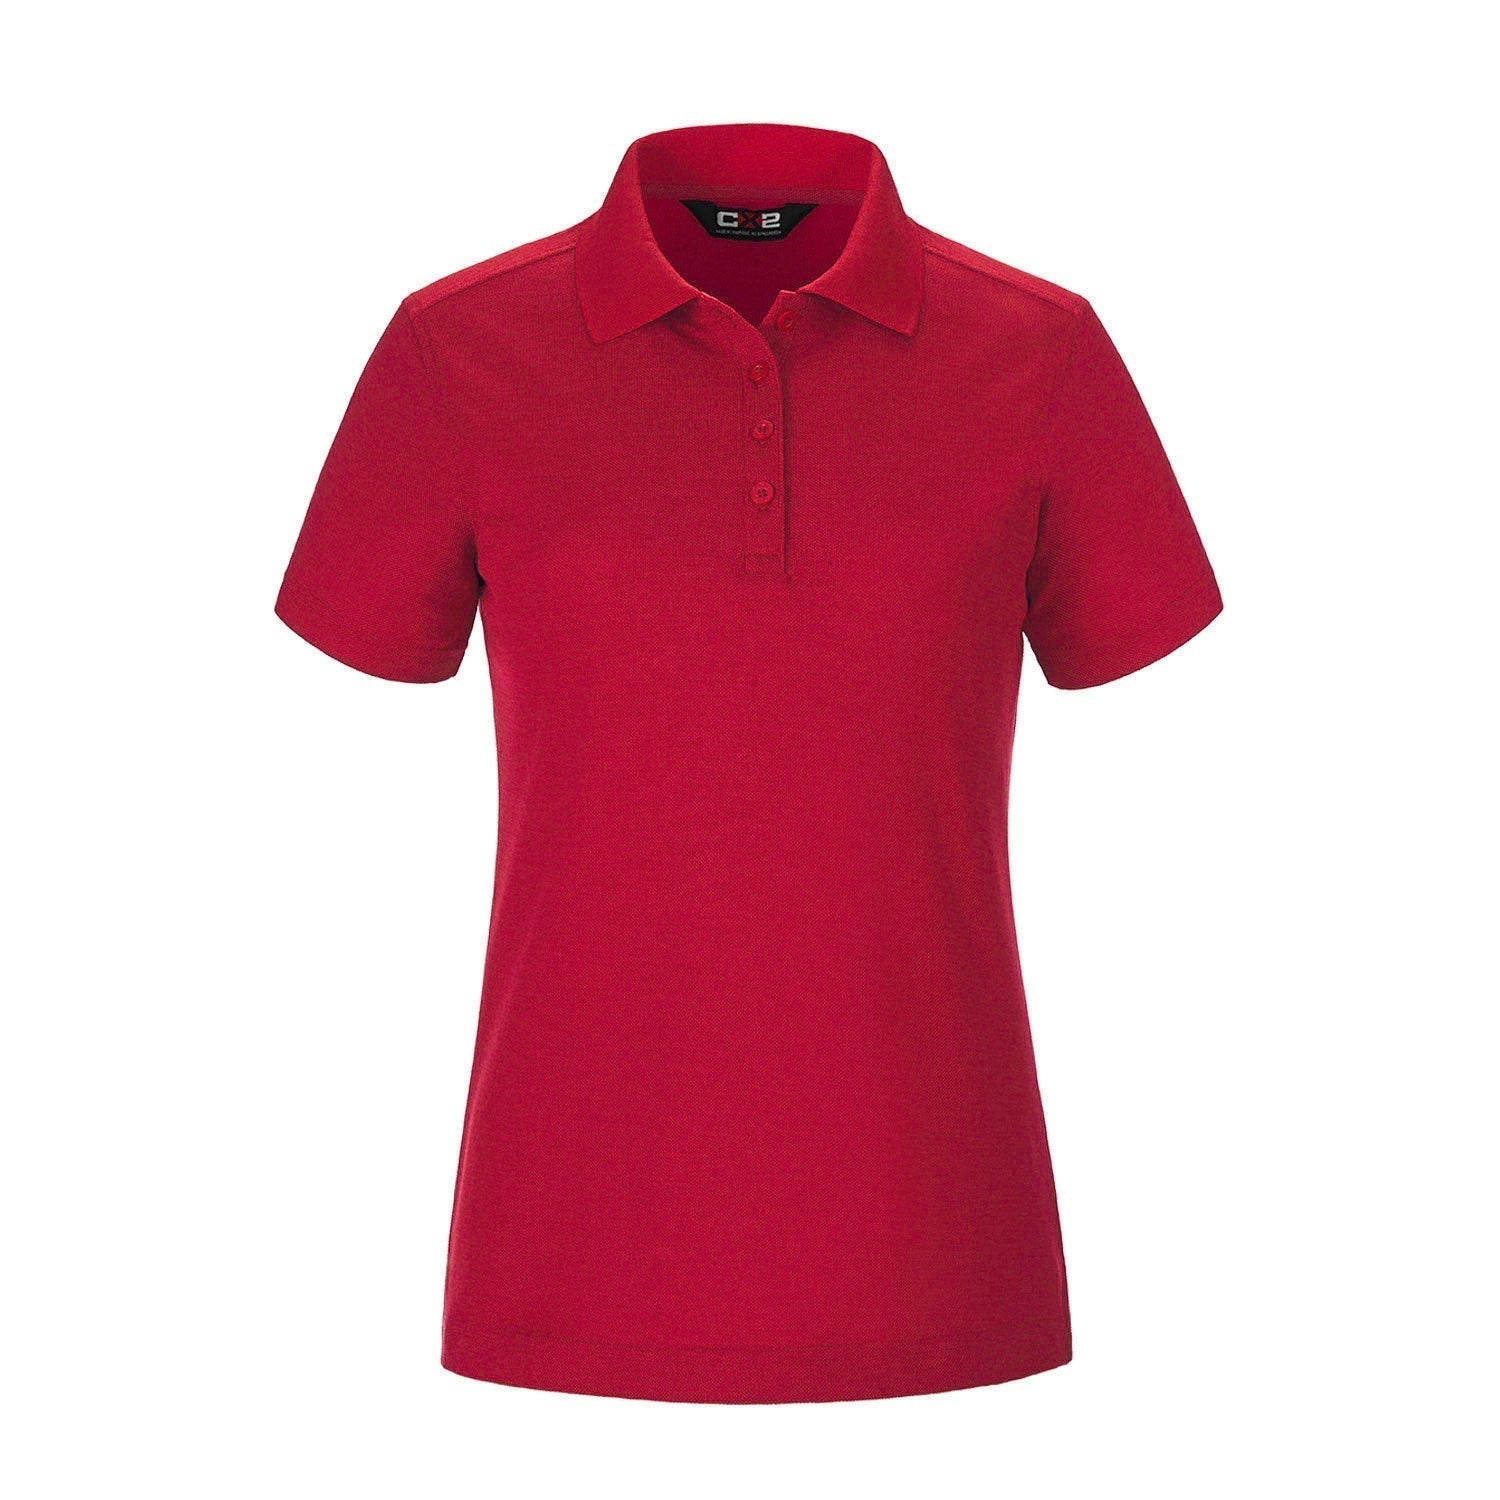 S05736 - Ace Ladies Pique Mesh Polo Red / XS Polos